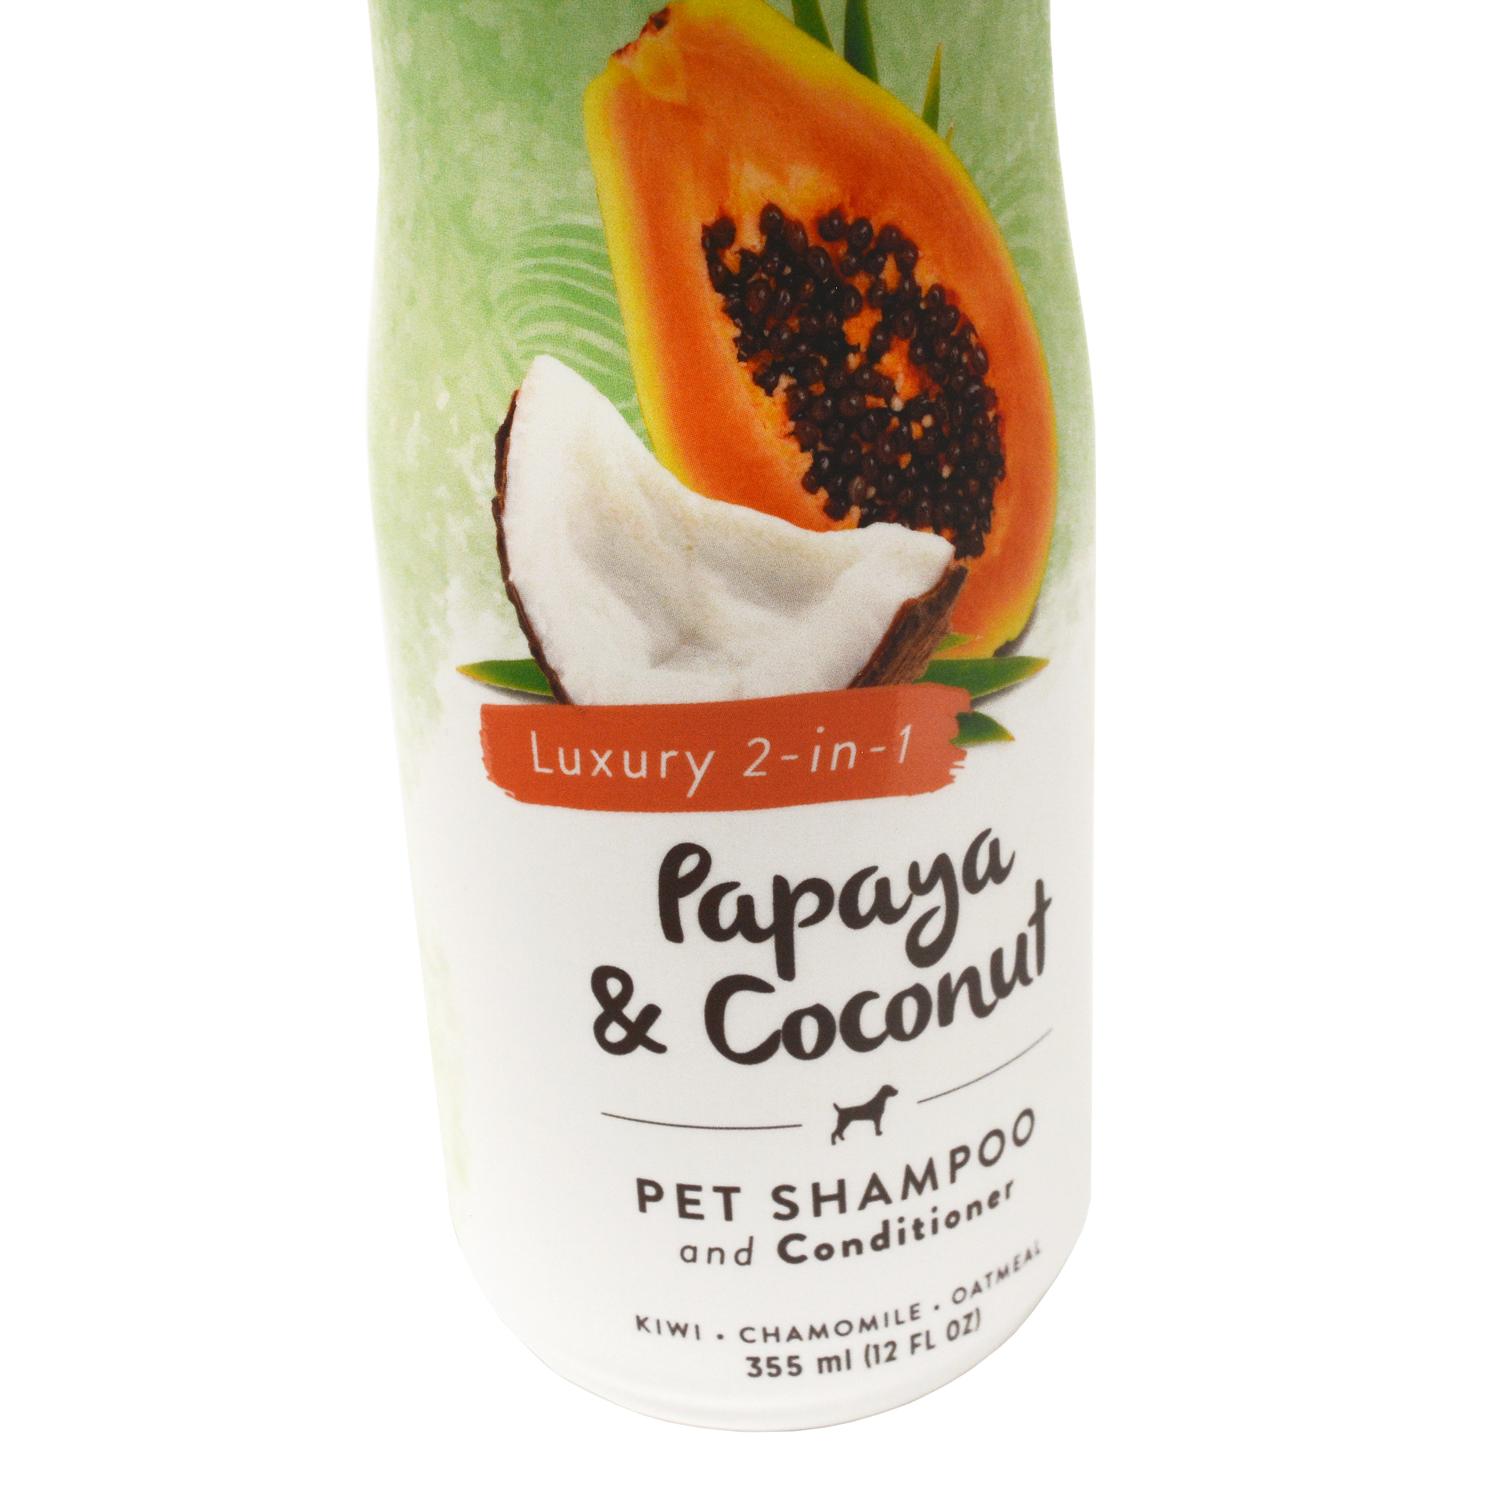 Close up of a bottle of Tropiclean Luxury 2 in 1 papaya and coconut Pet Shampoo and Conditioner